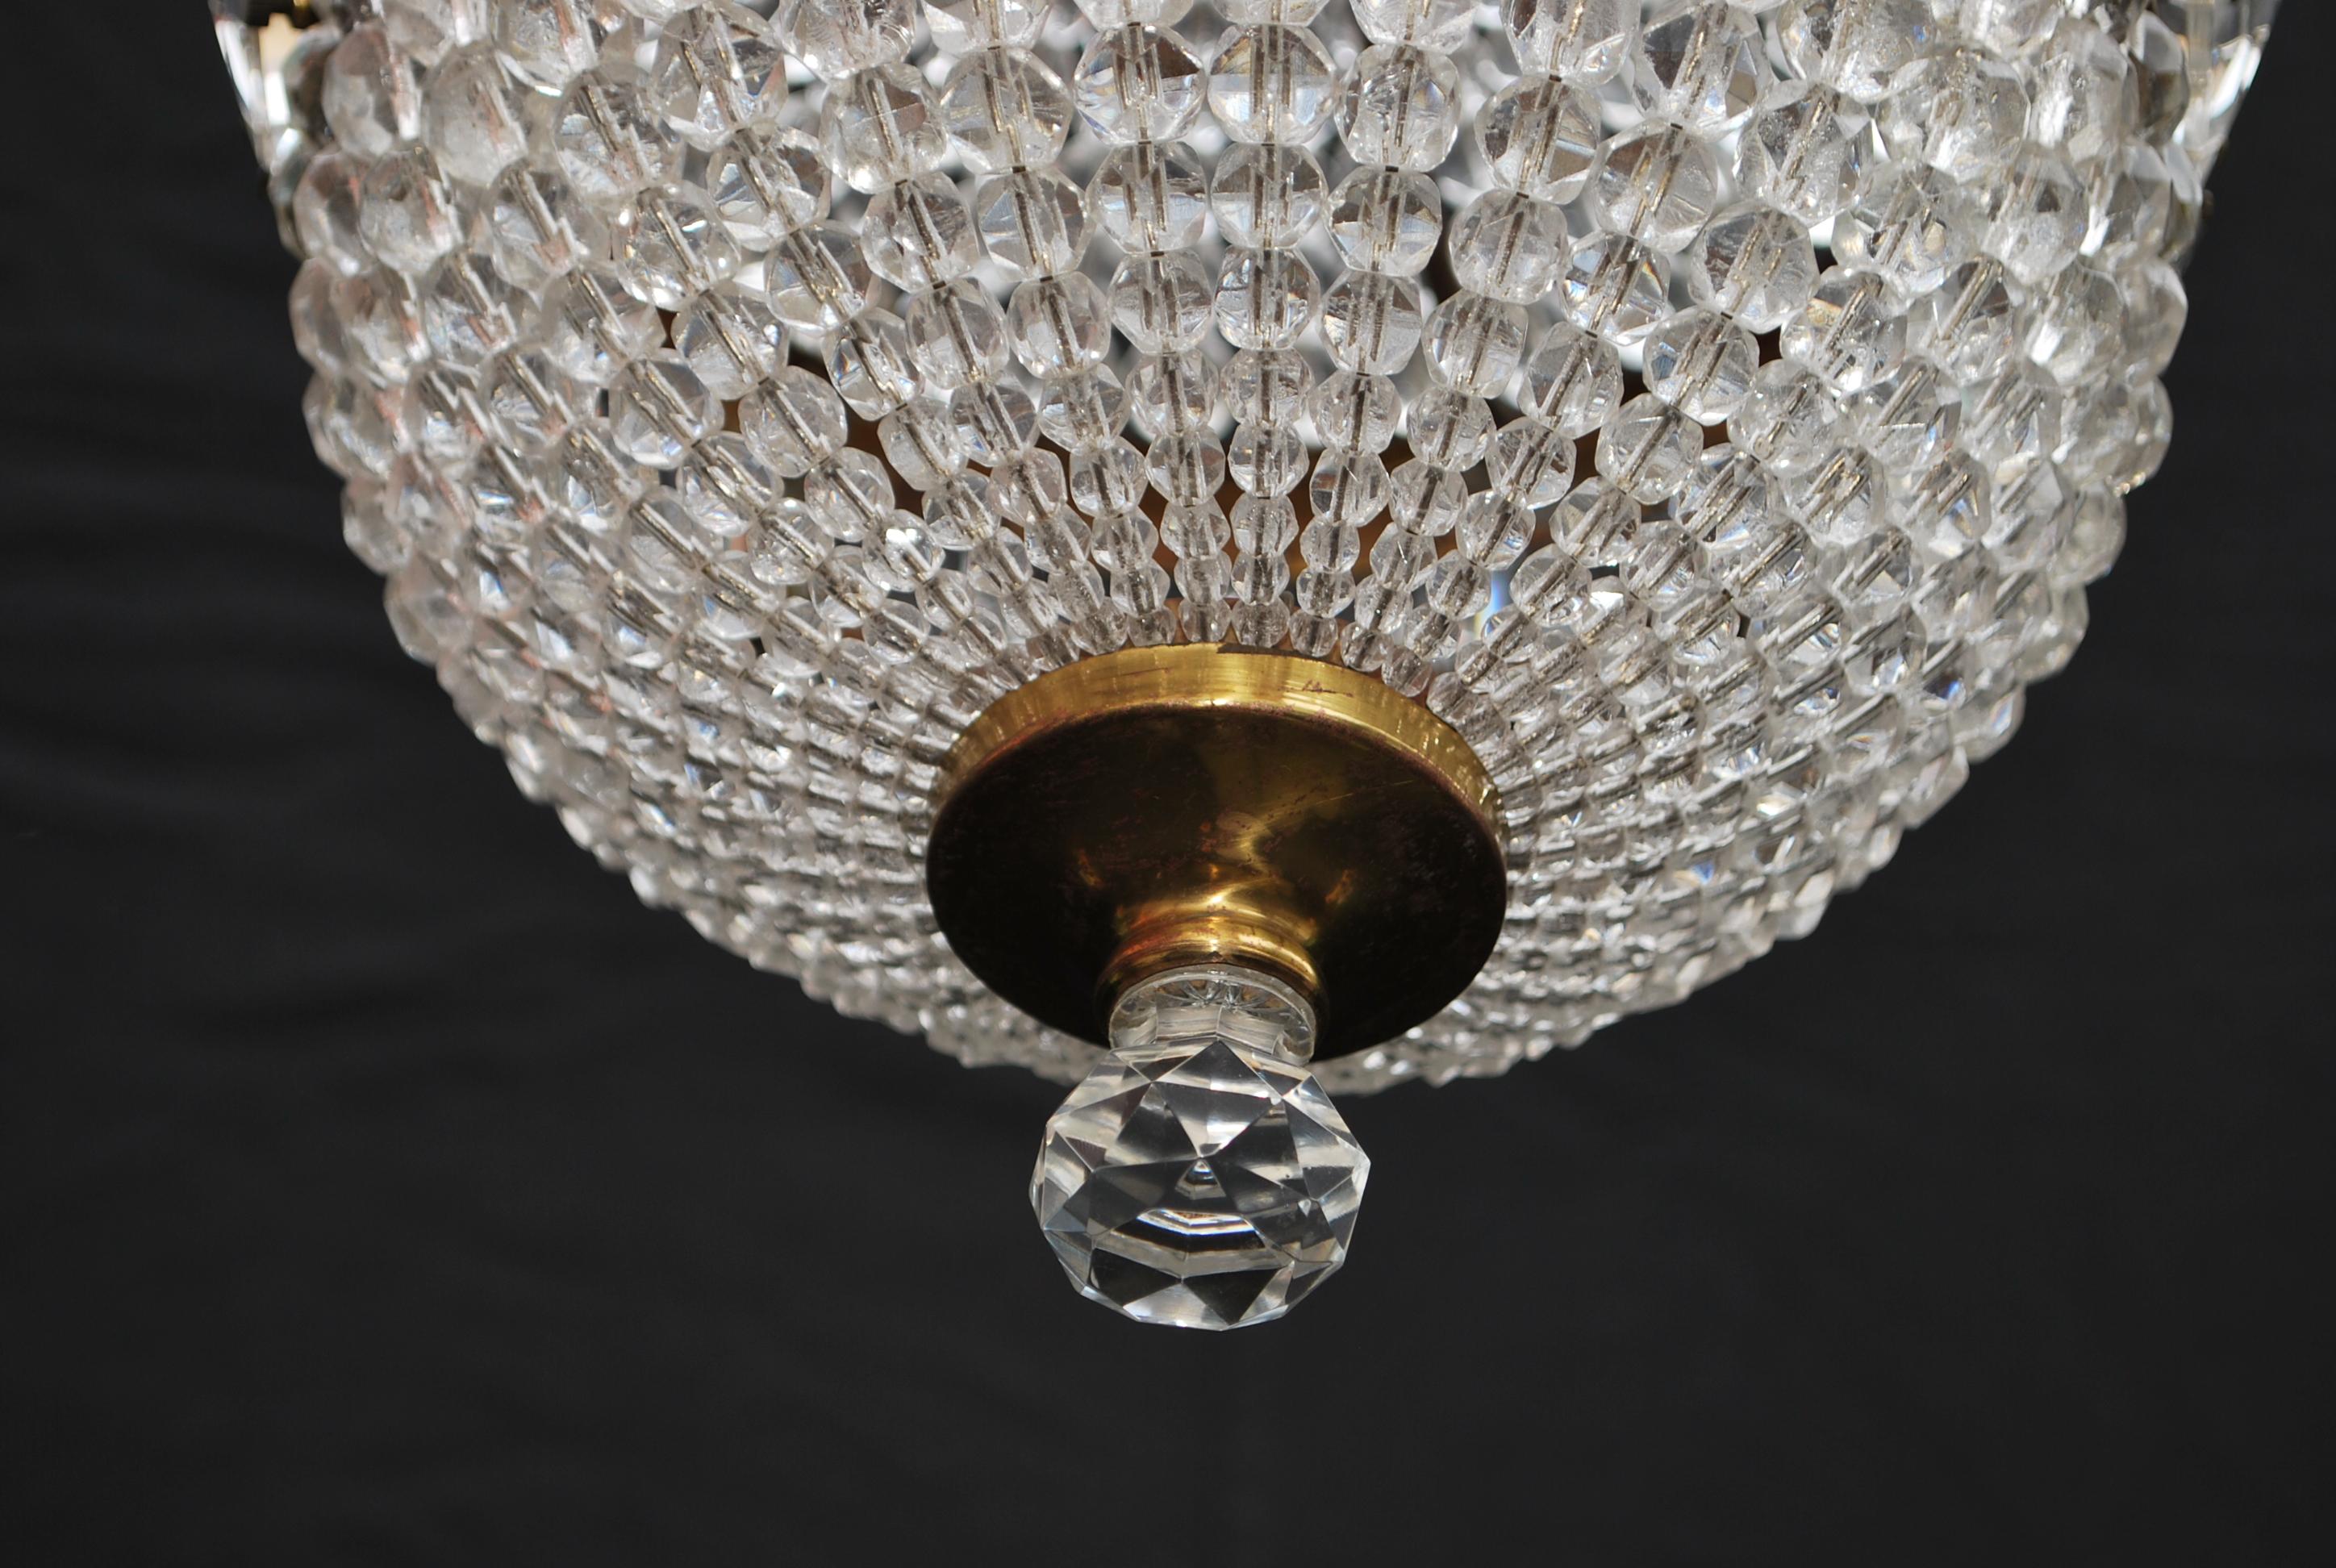 A beautiful and elegant Beaded lights, it is so charming, this light could go in so many area.